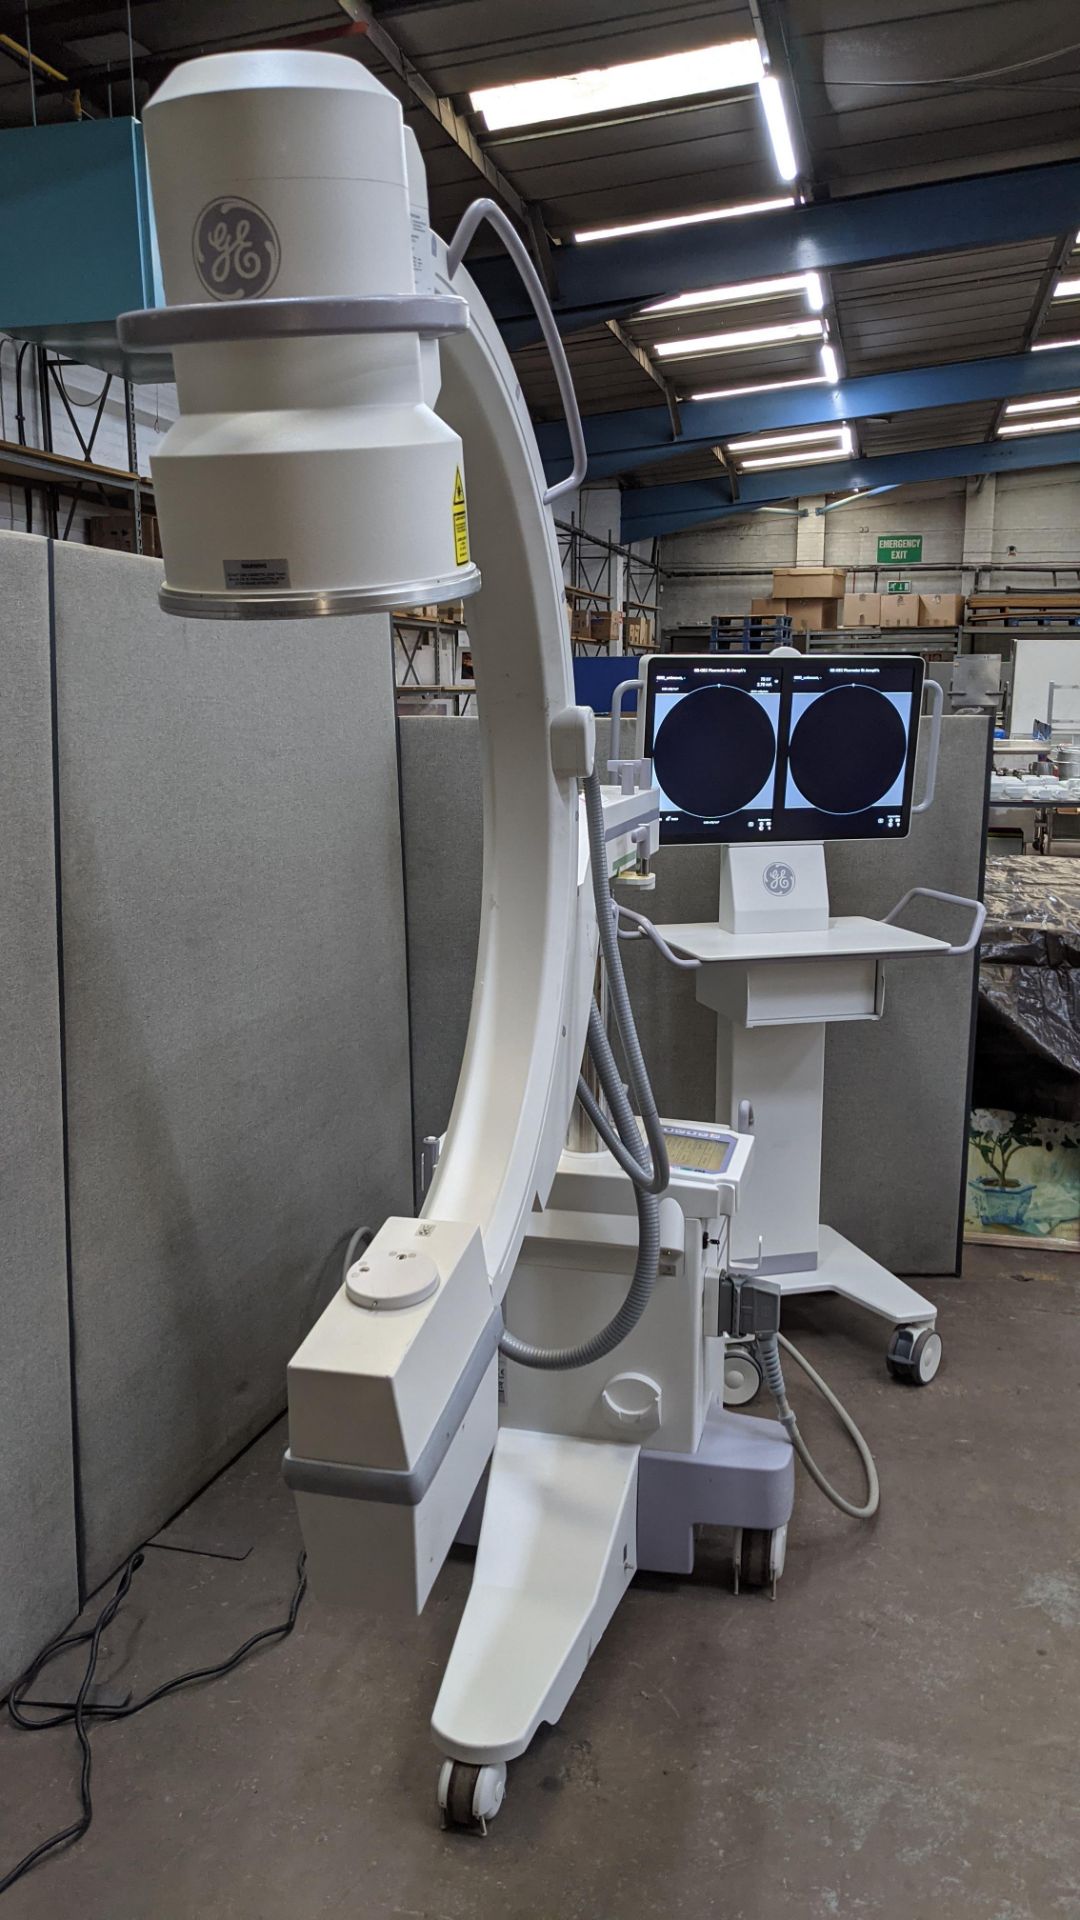 GE-OEC Fluorostar imaging system, purchased new in August 2017. EO4 Series. - Image 61 of 68